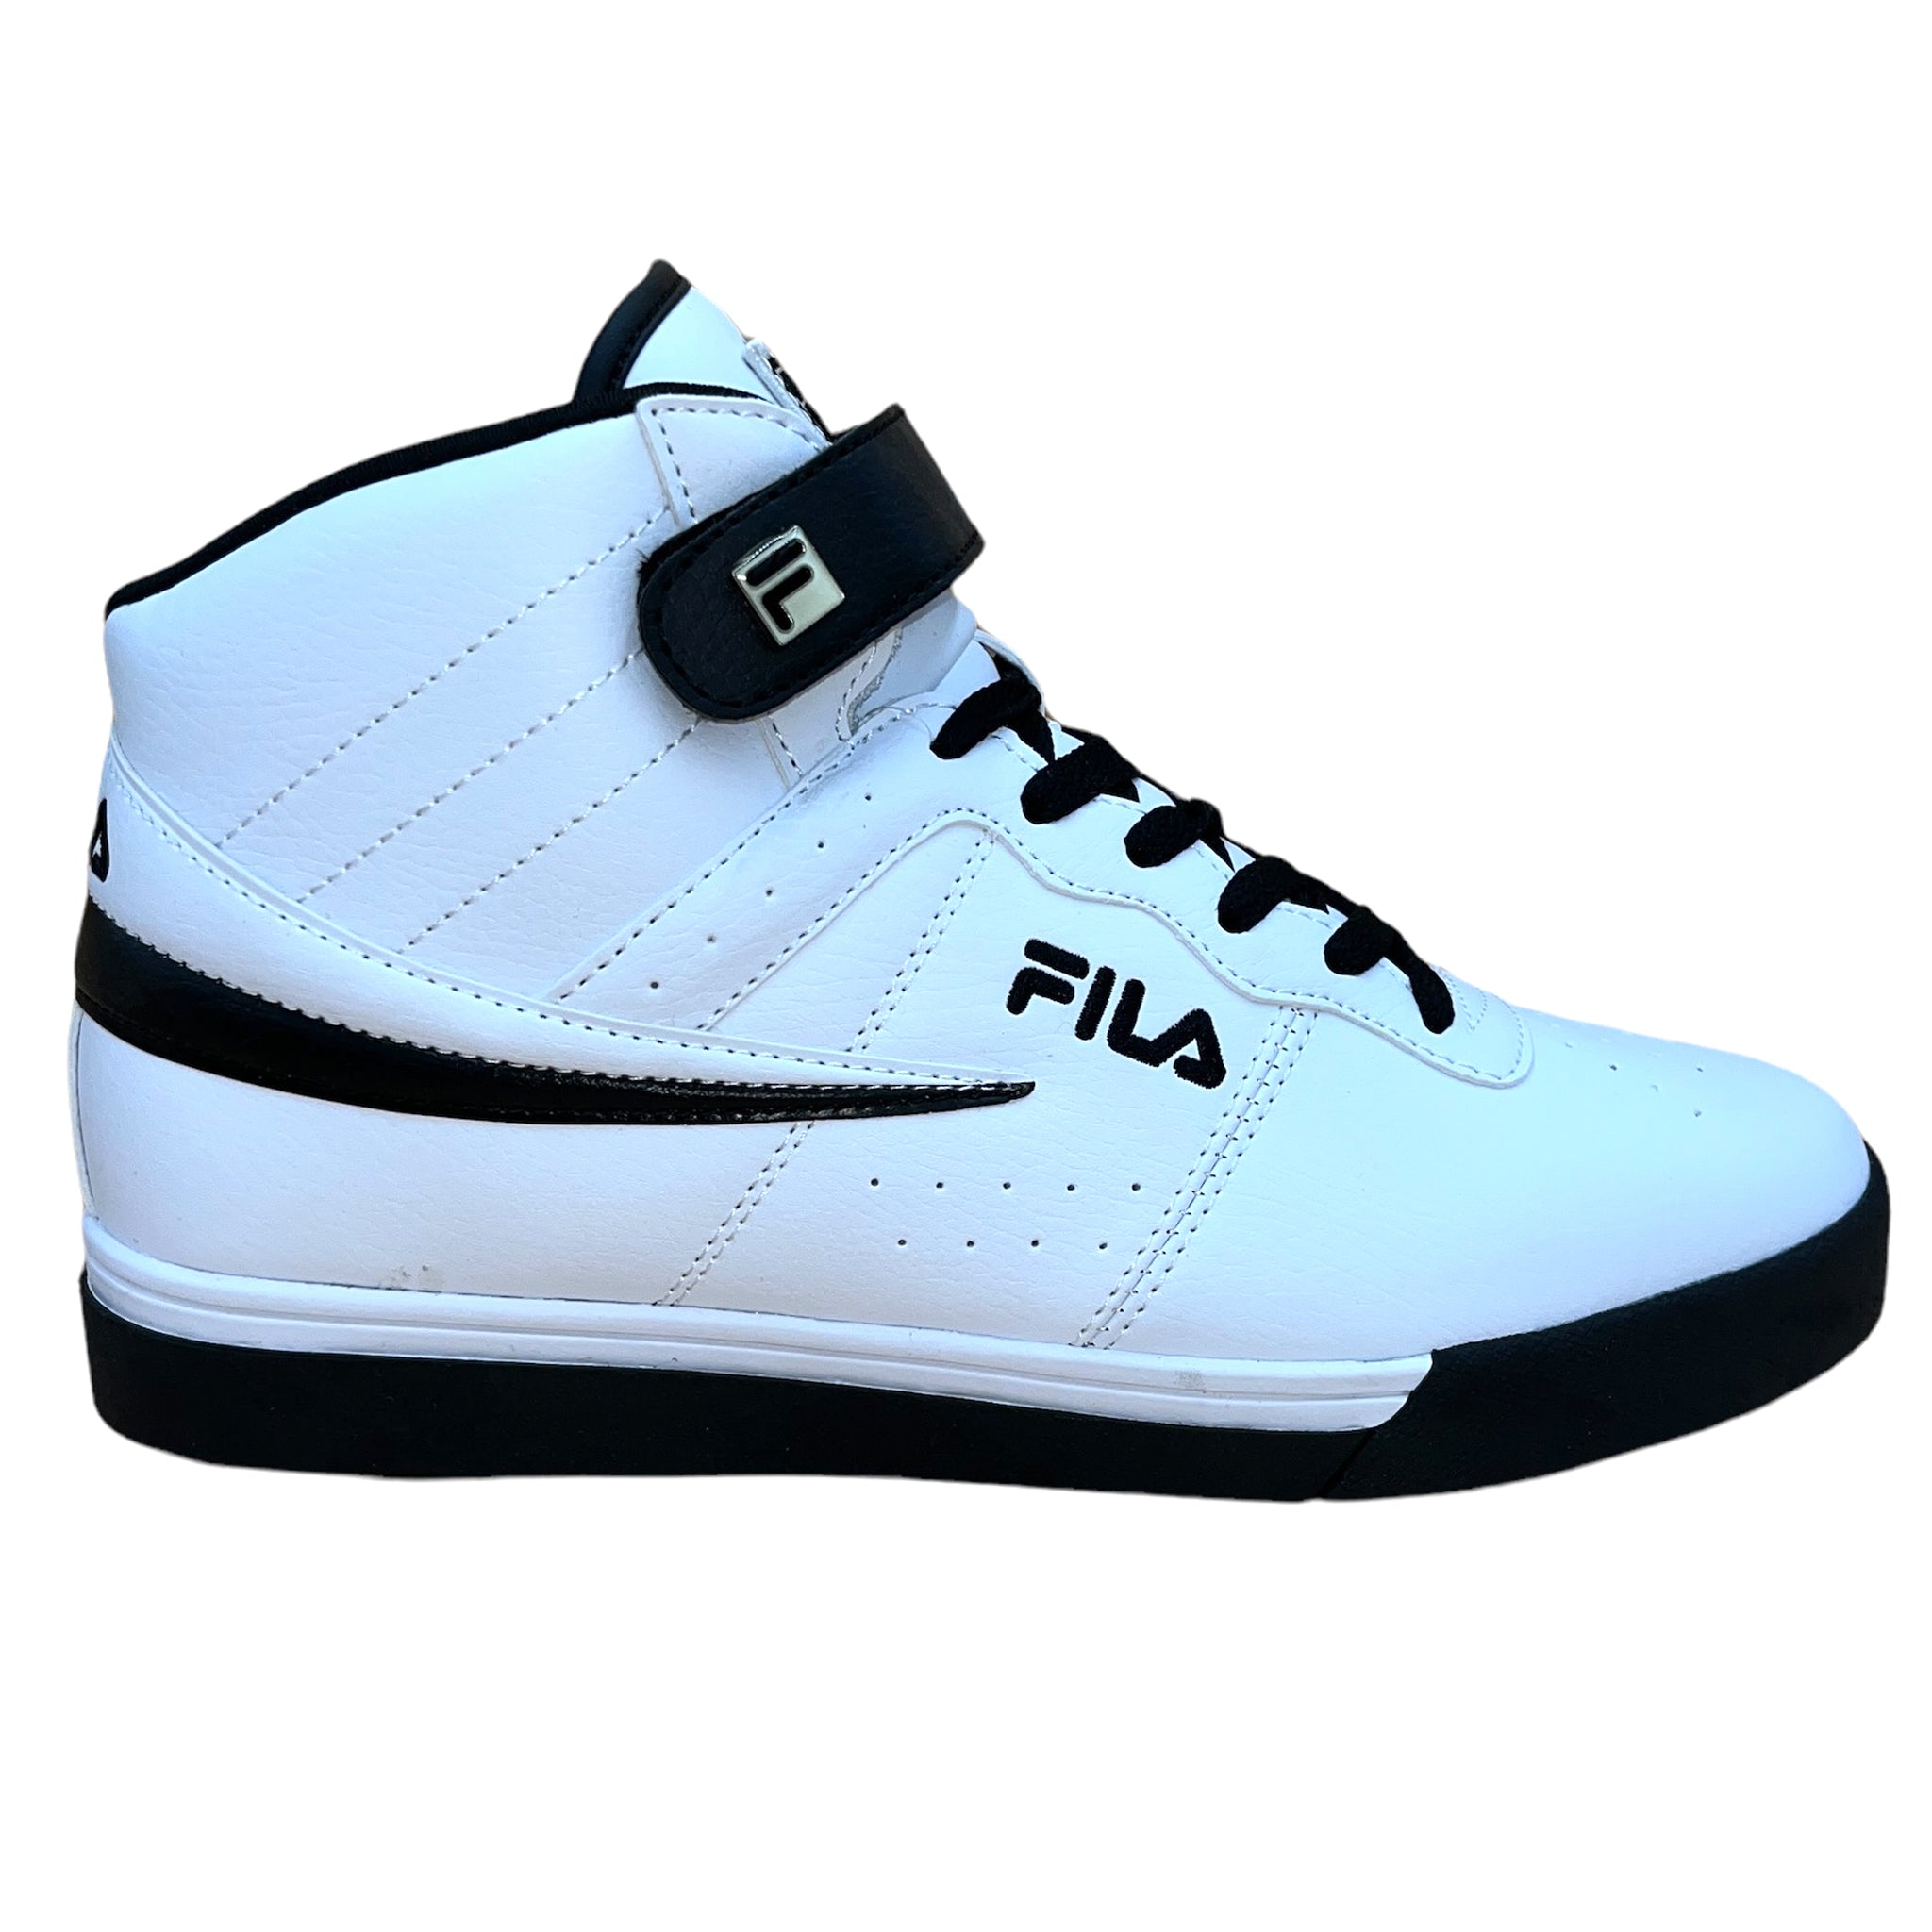 Fila Men's 13 Mid White Black Casual Shoes 1SC60526-112 – That Shoe and More